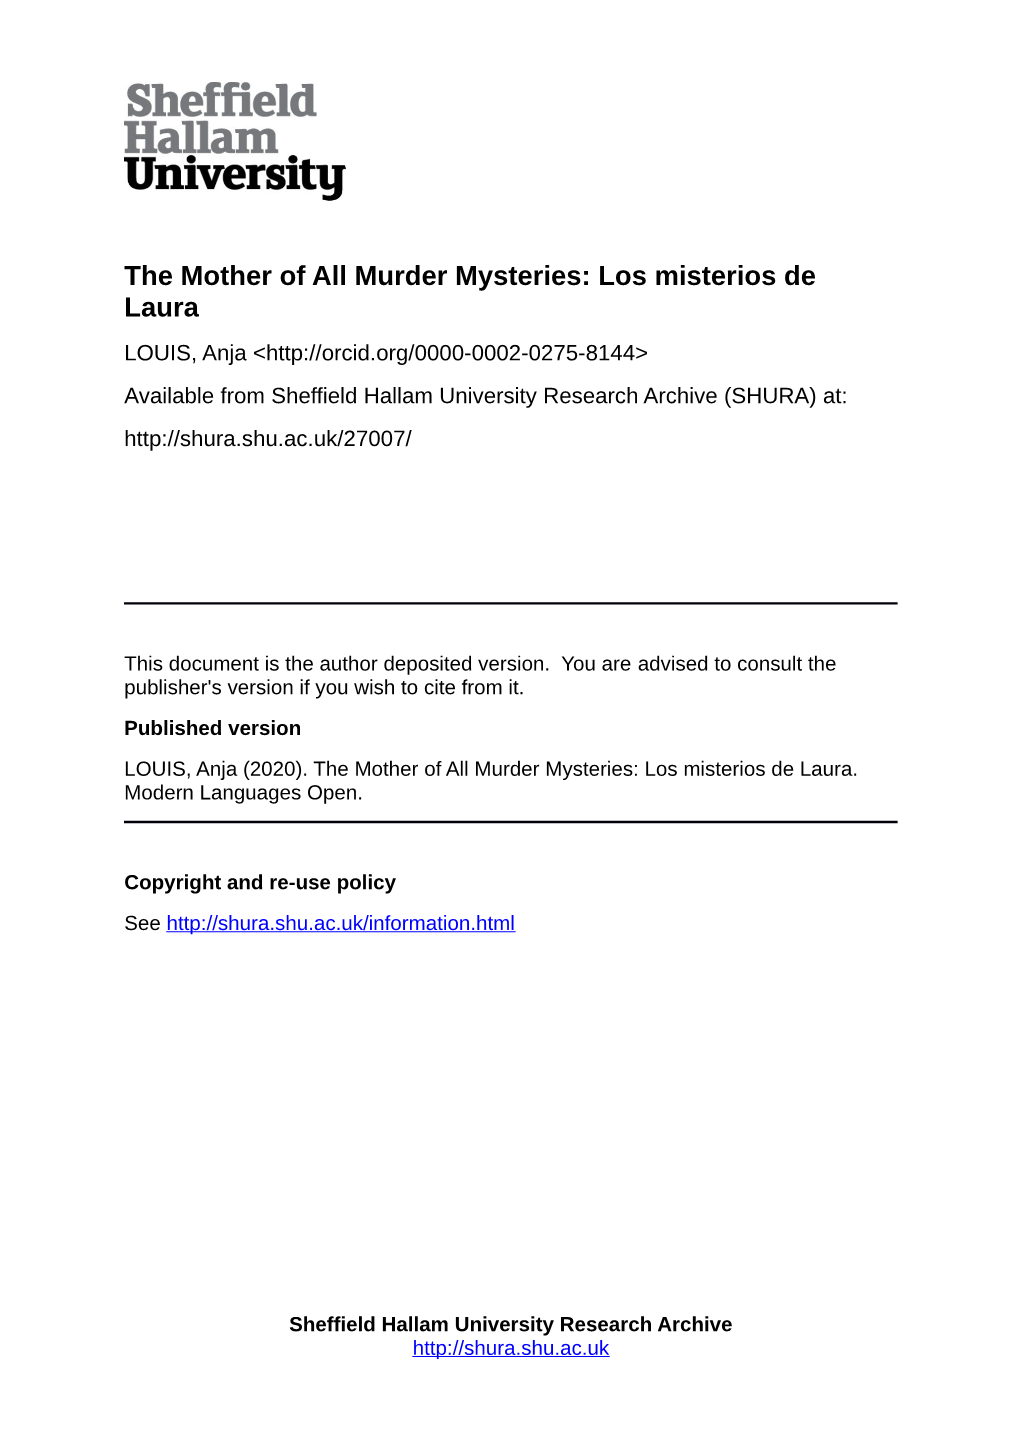 The Mother of All Murder Mysteries: Los Misterios De Laura